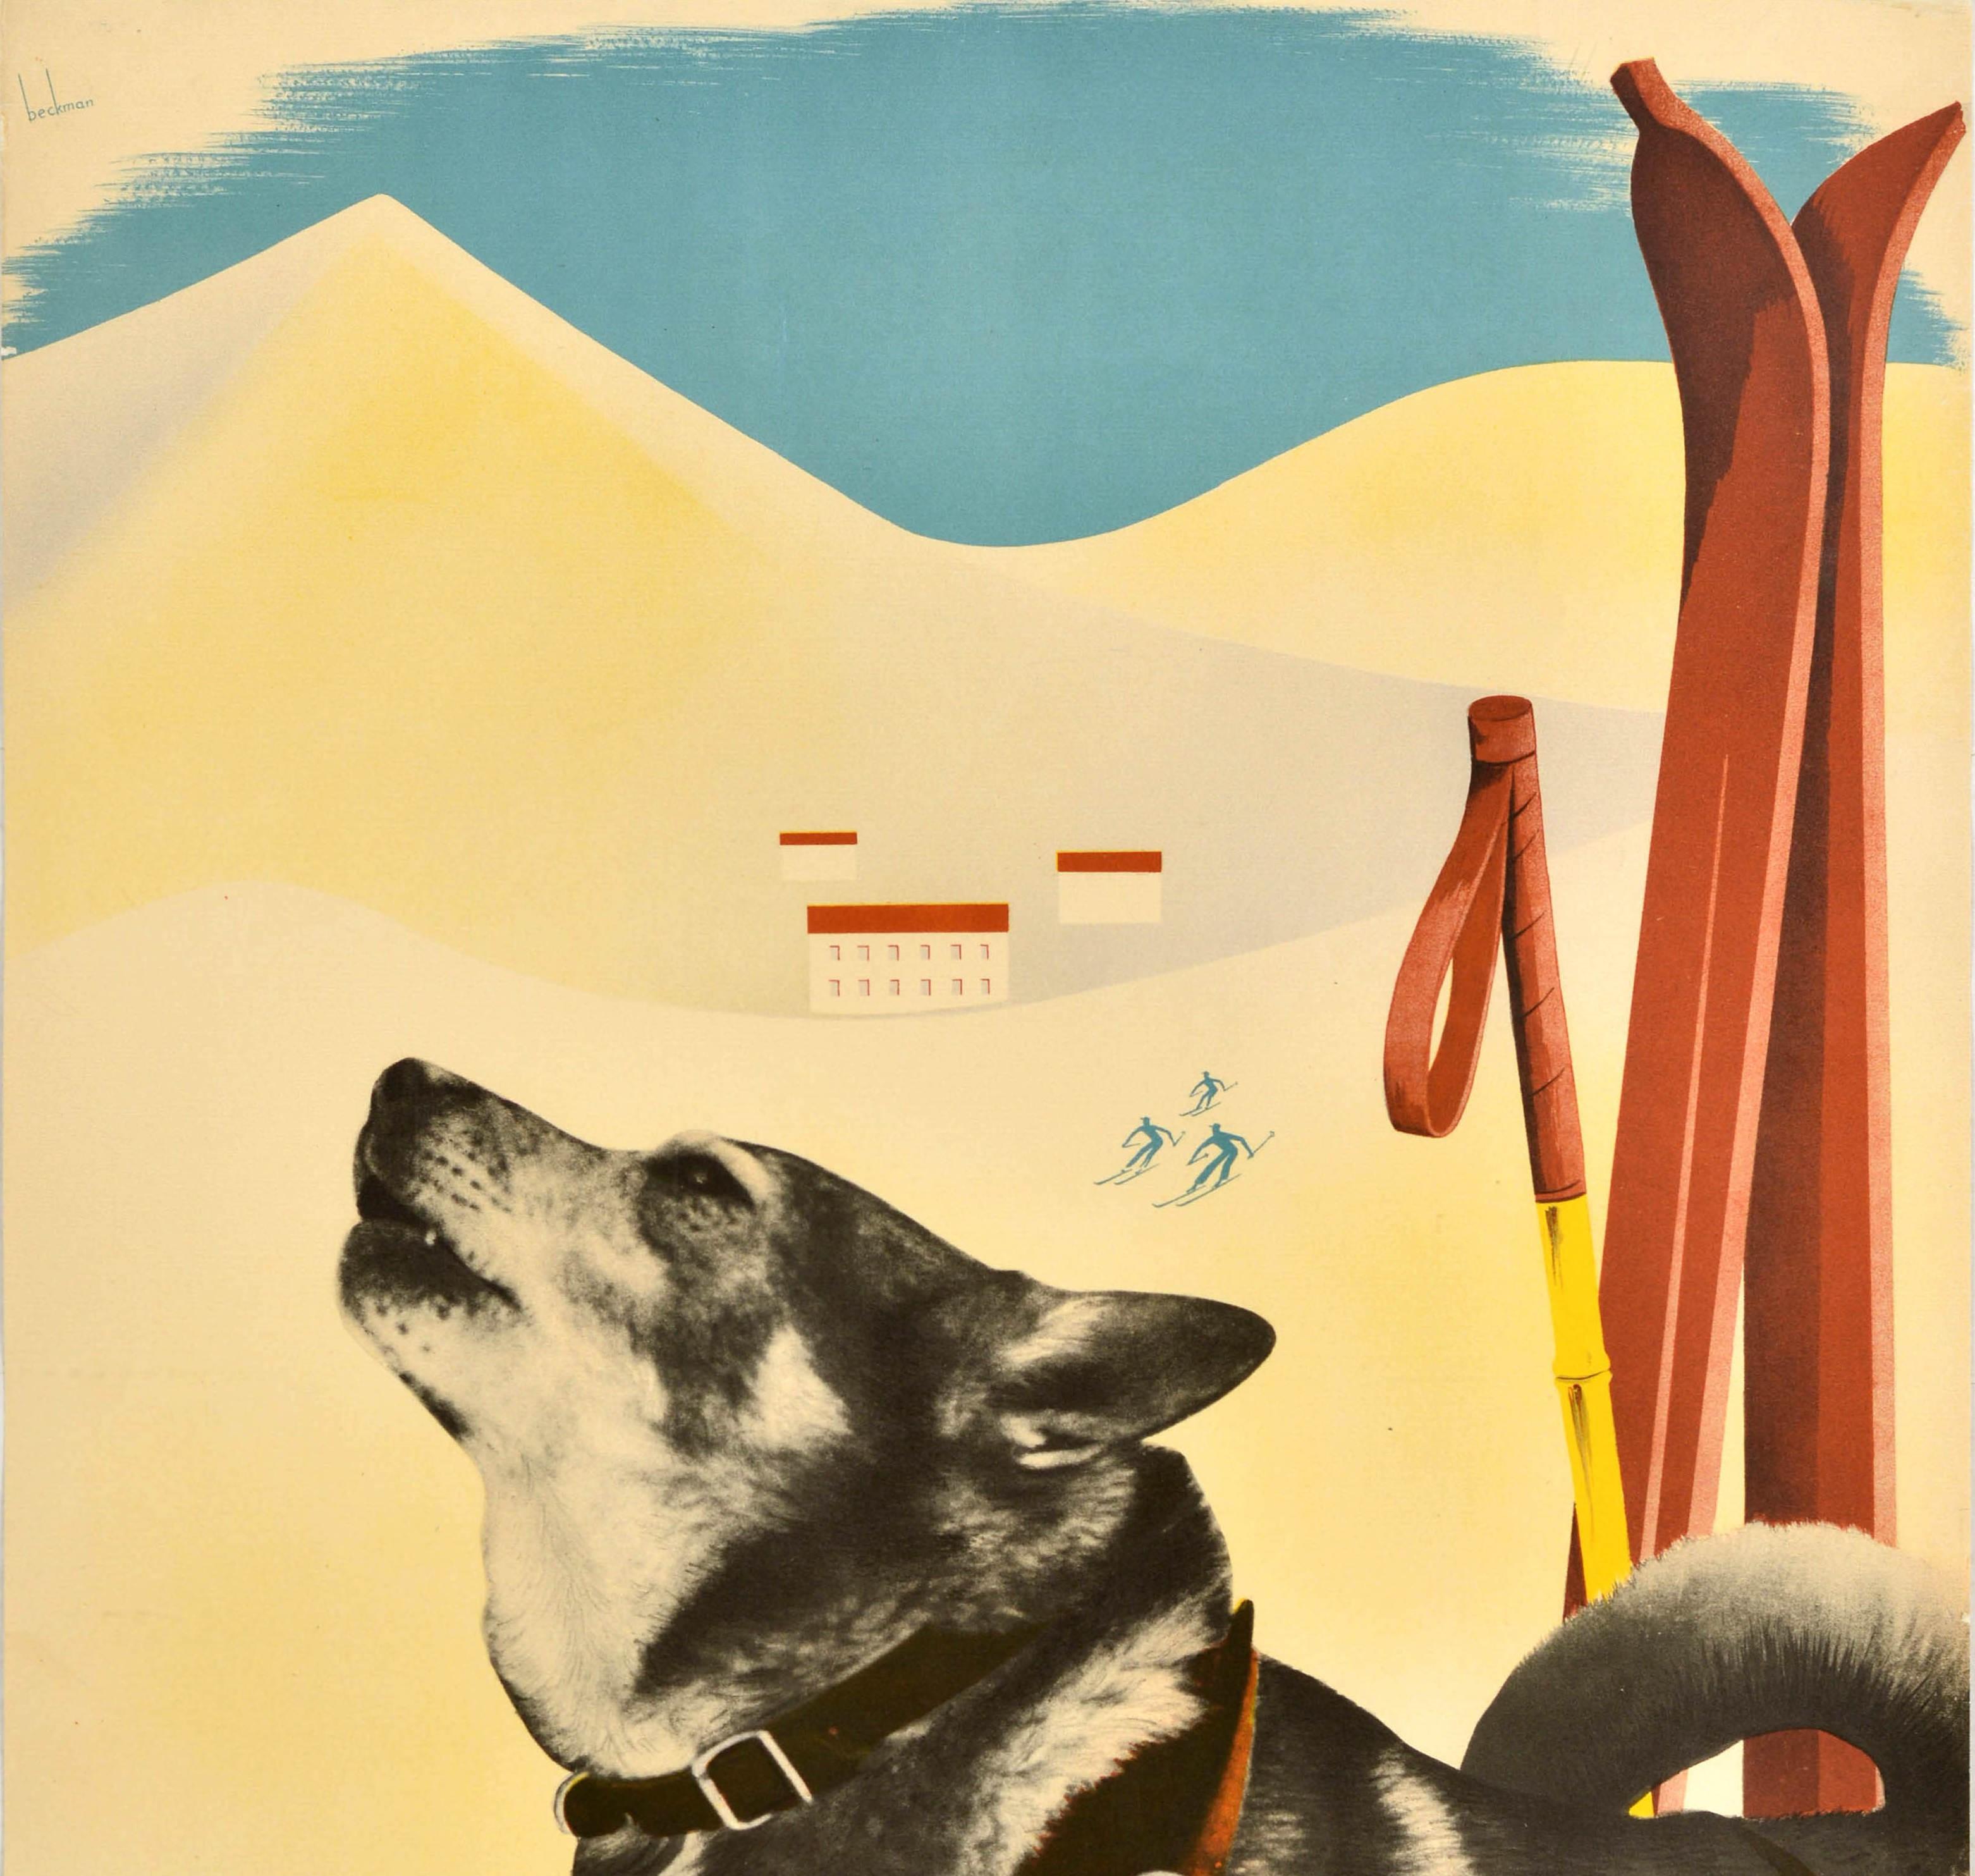 Original vintage ski and winter sport poster - Sverige Vintersportlandet - featuring a great design by Anders Beckman (1907-1967) depicting a black and white photograph of a Norwegian Elkhound or husky dog wearing a harness in the foreground with